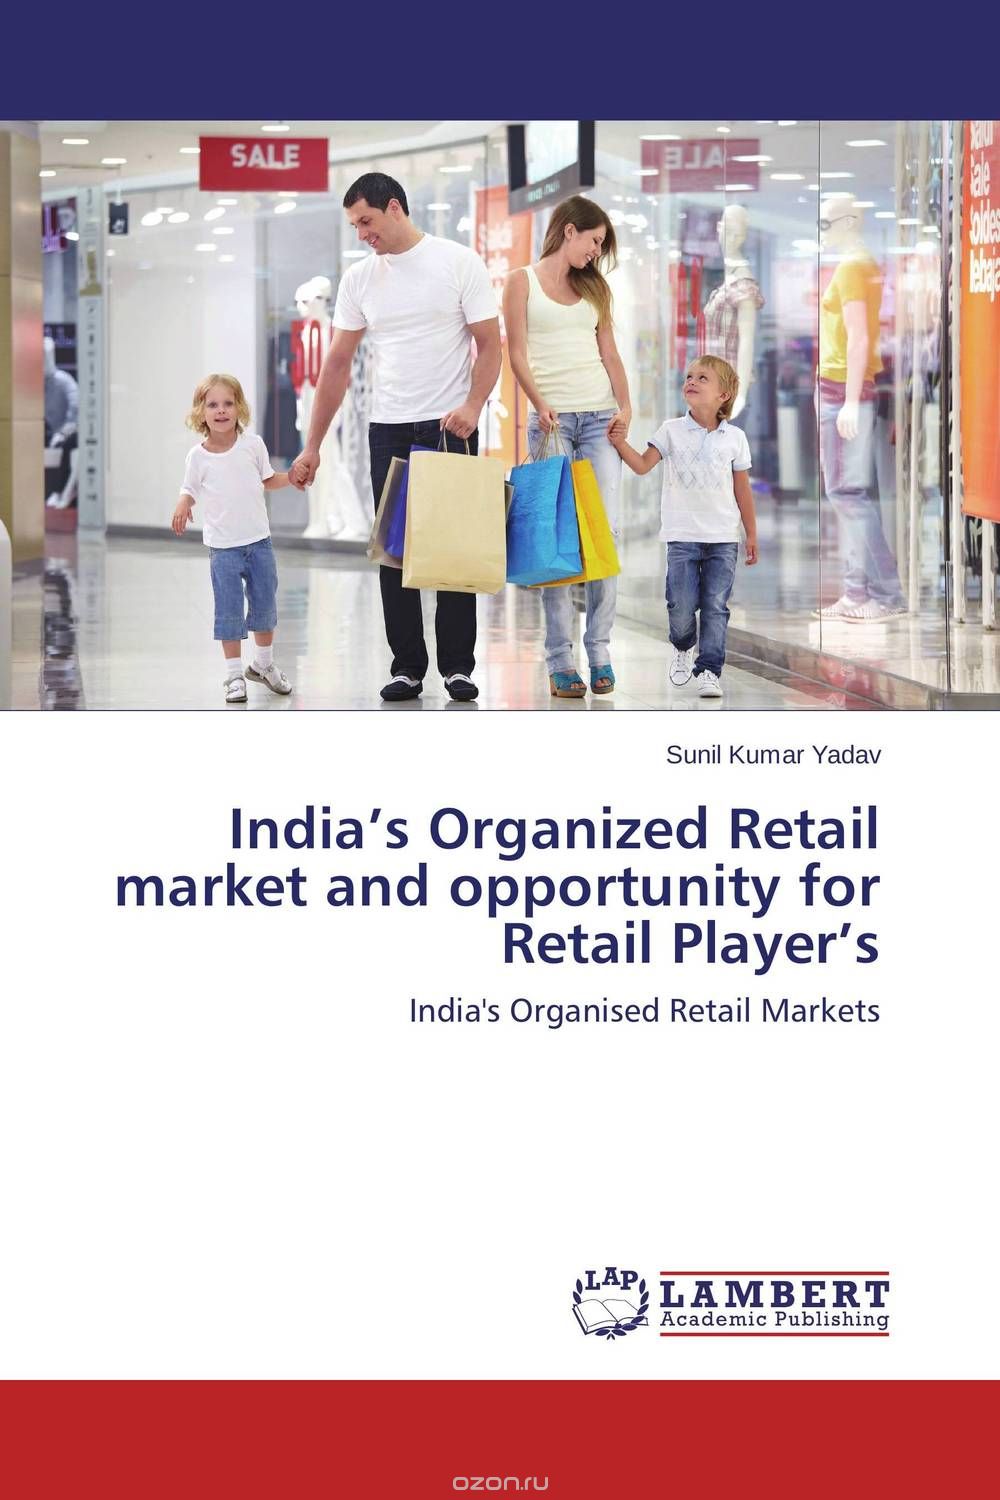 India’s Organized Retail market and opportunity for Retail Player’s